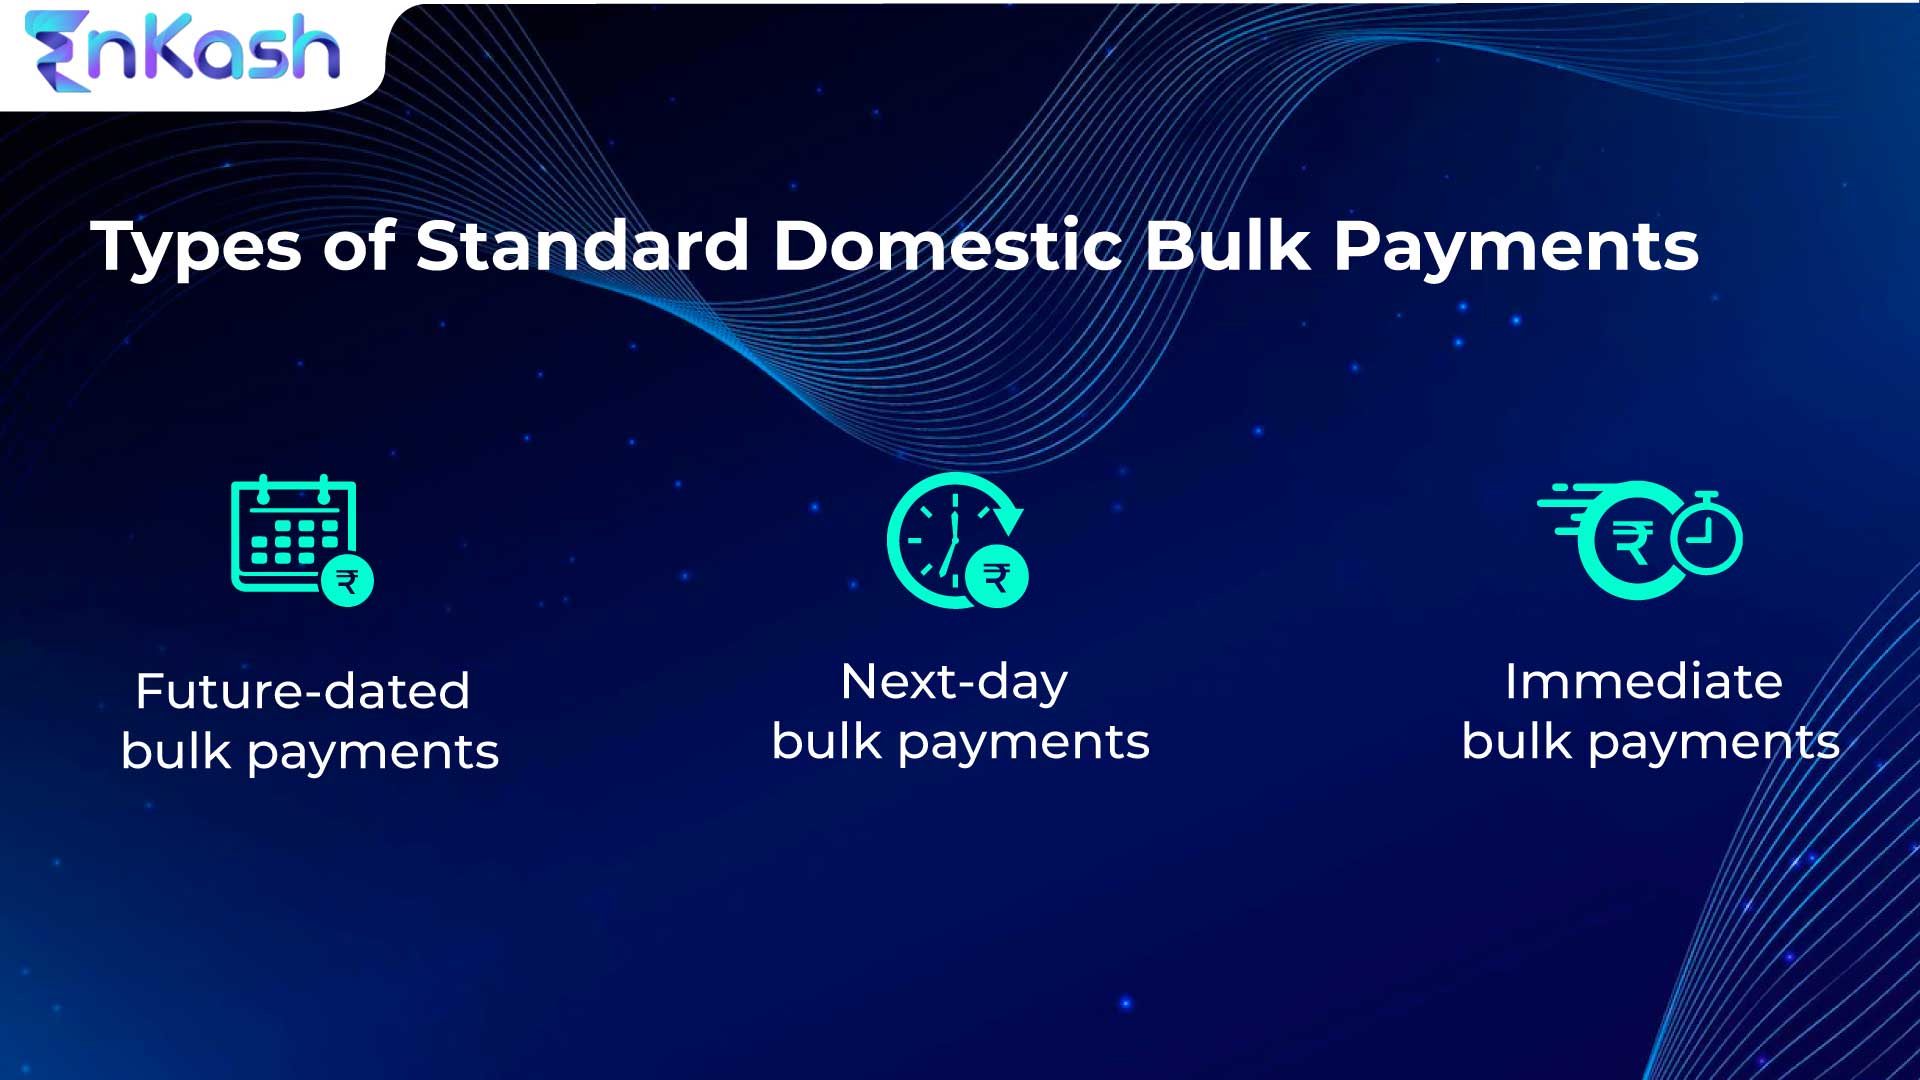 Types of standard domestic bulk payments